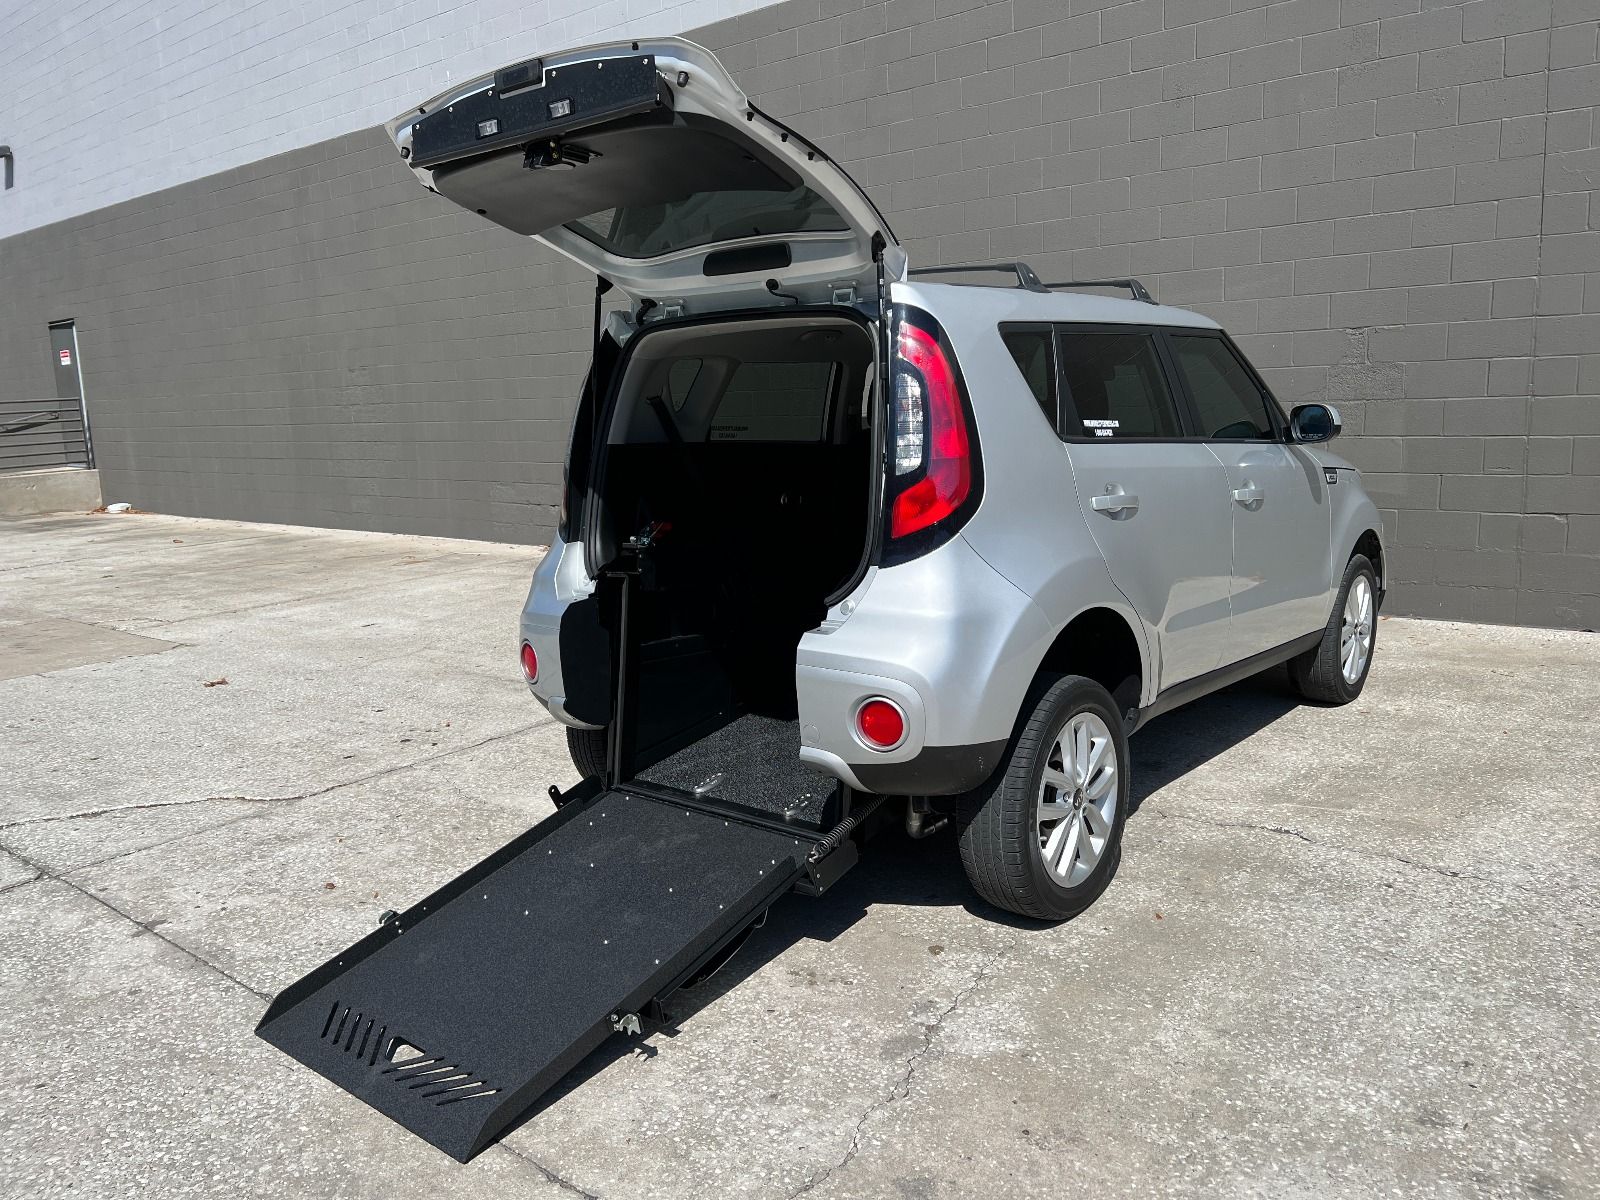 Kia Soul Rear Entry Wheelchair Accessible SUV, as seen from rear side angle.